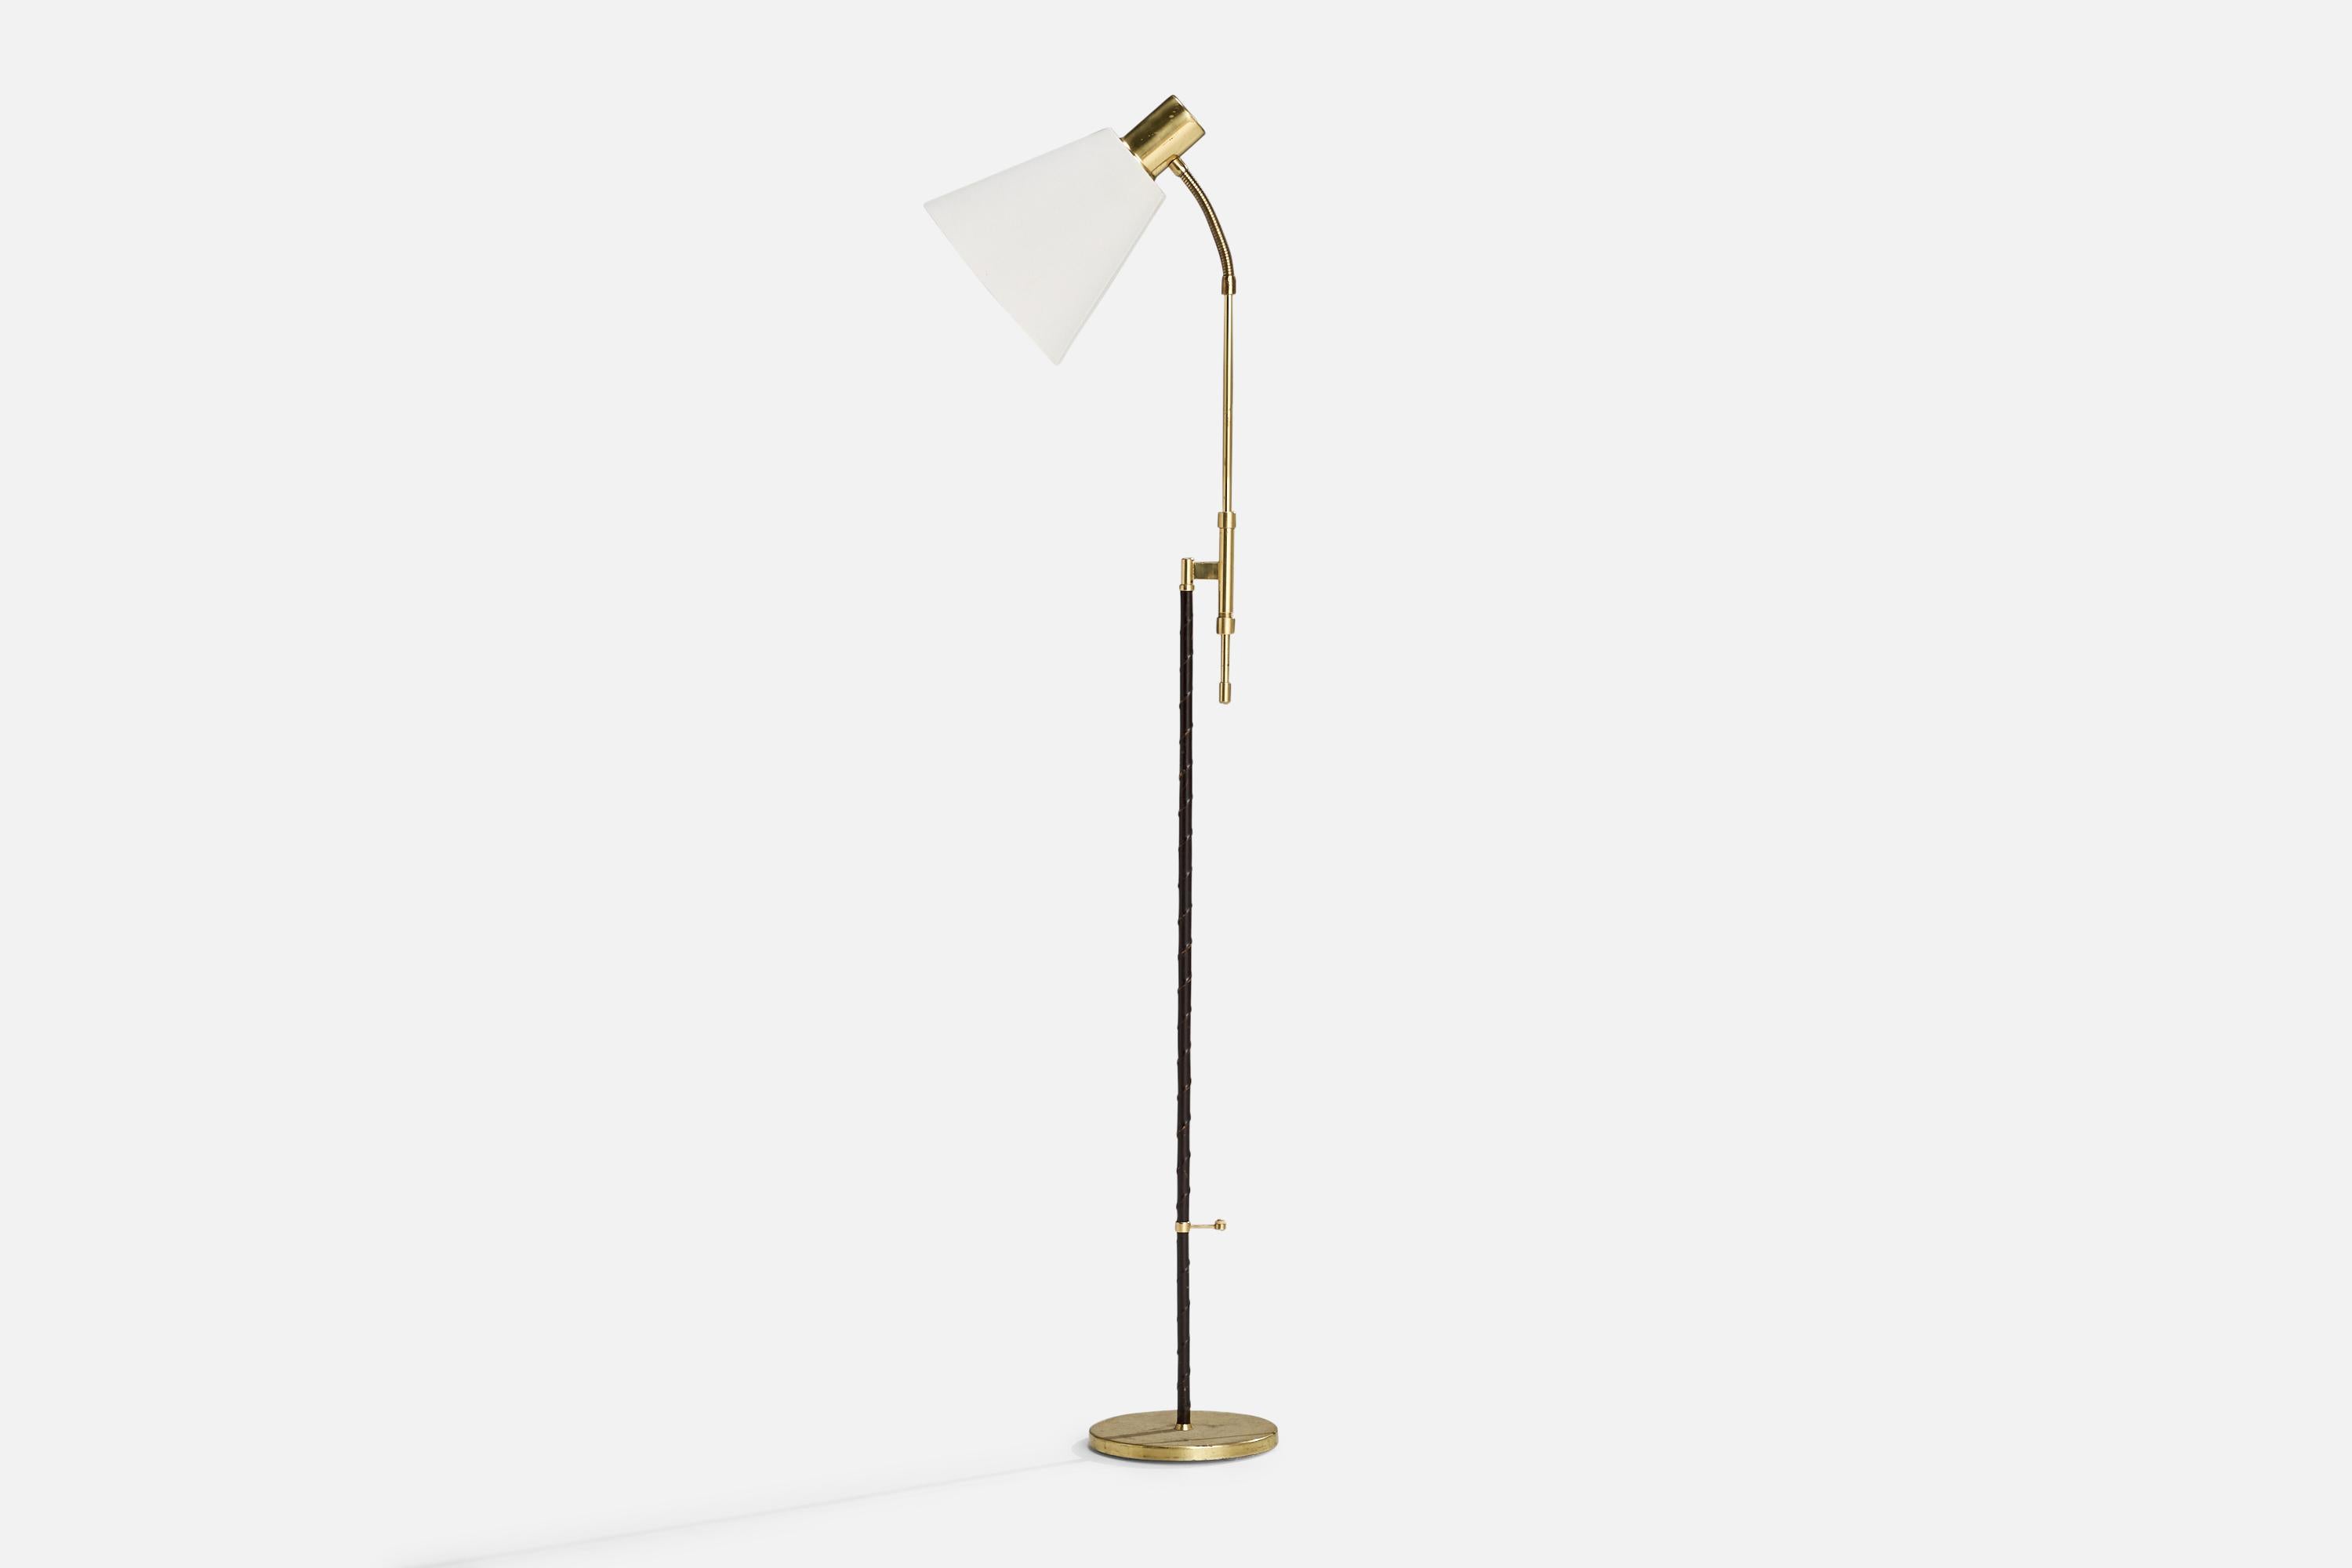 An adjustable brass, leather and fabric floor lamp designed by Falkenbergs Belysning, Sweden, 1950s.

Please note cord feeds visibly from stem connected to socket.

Overall Dimensions (inches): 53.94” H x 8.67”  W x 19.3” D
Stated dimensions include